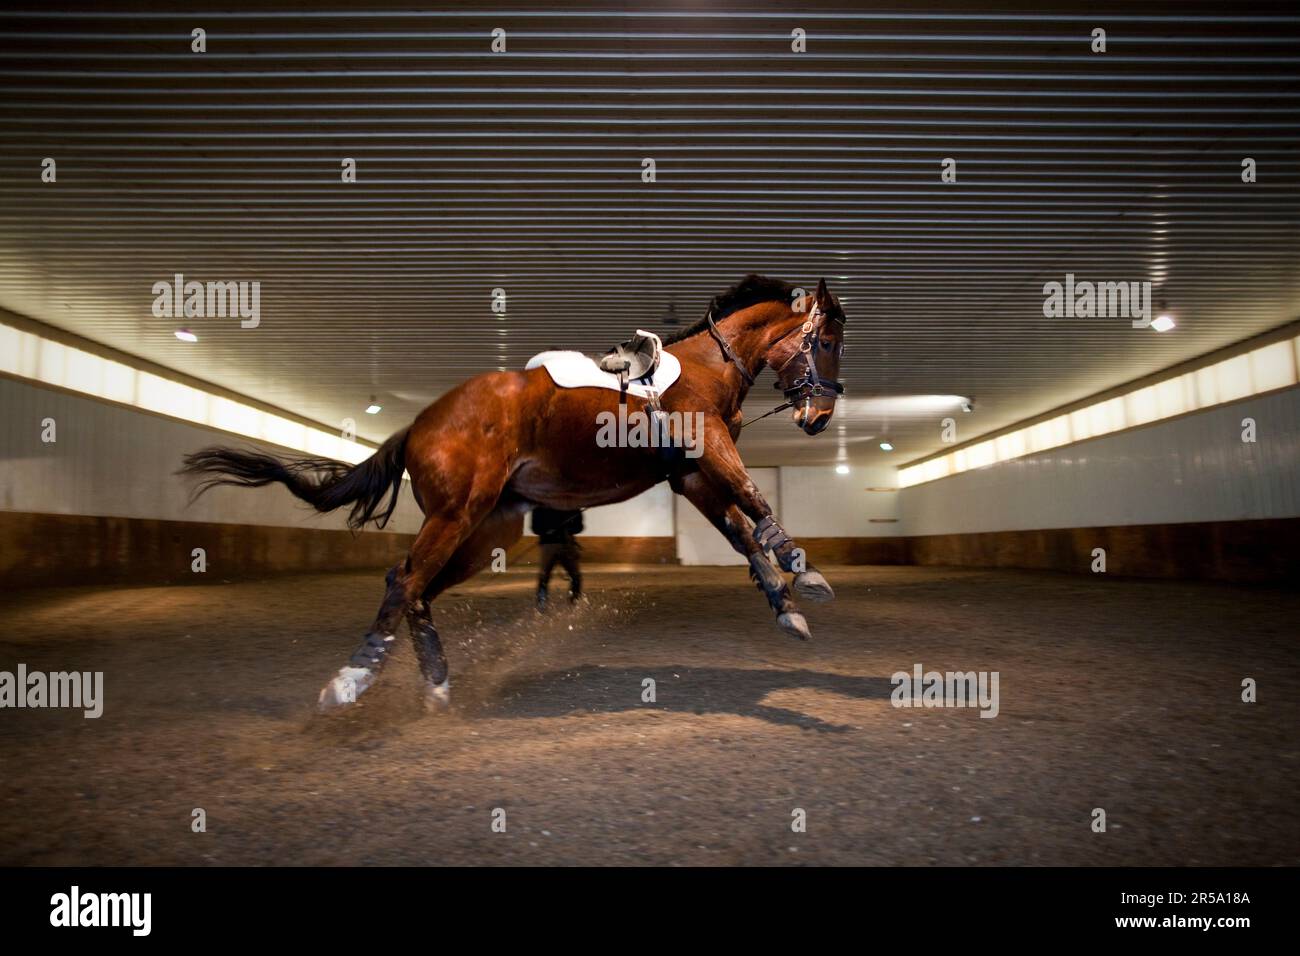 A young horse kicks out explosively while on the lunge line, Thomas Farm, Medina, Minnesota. Stock Photo